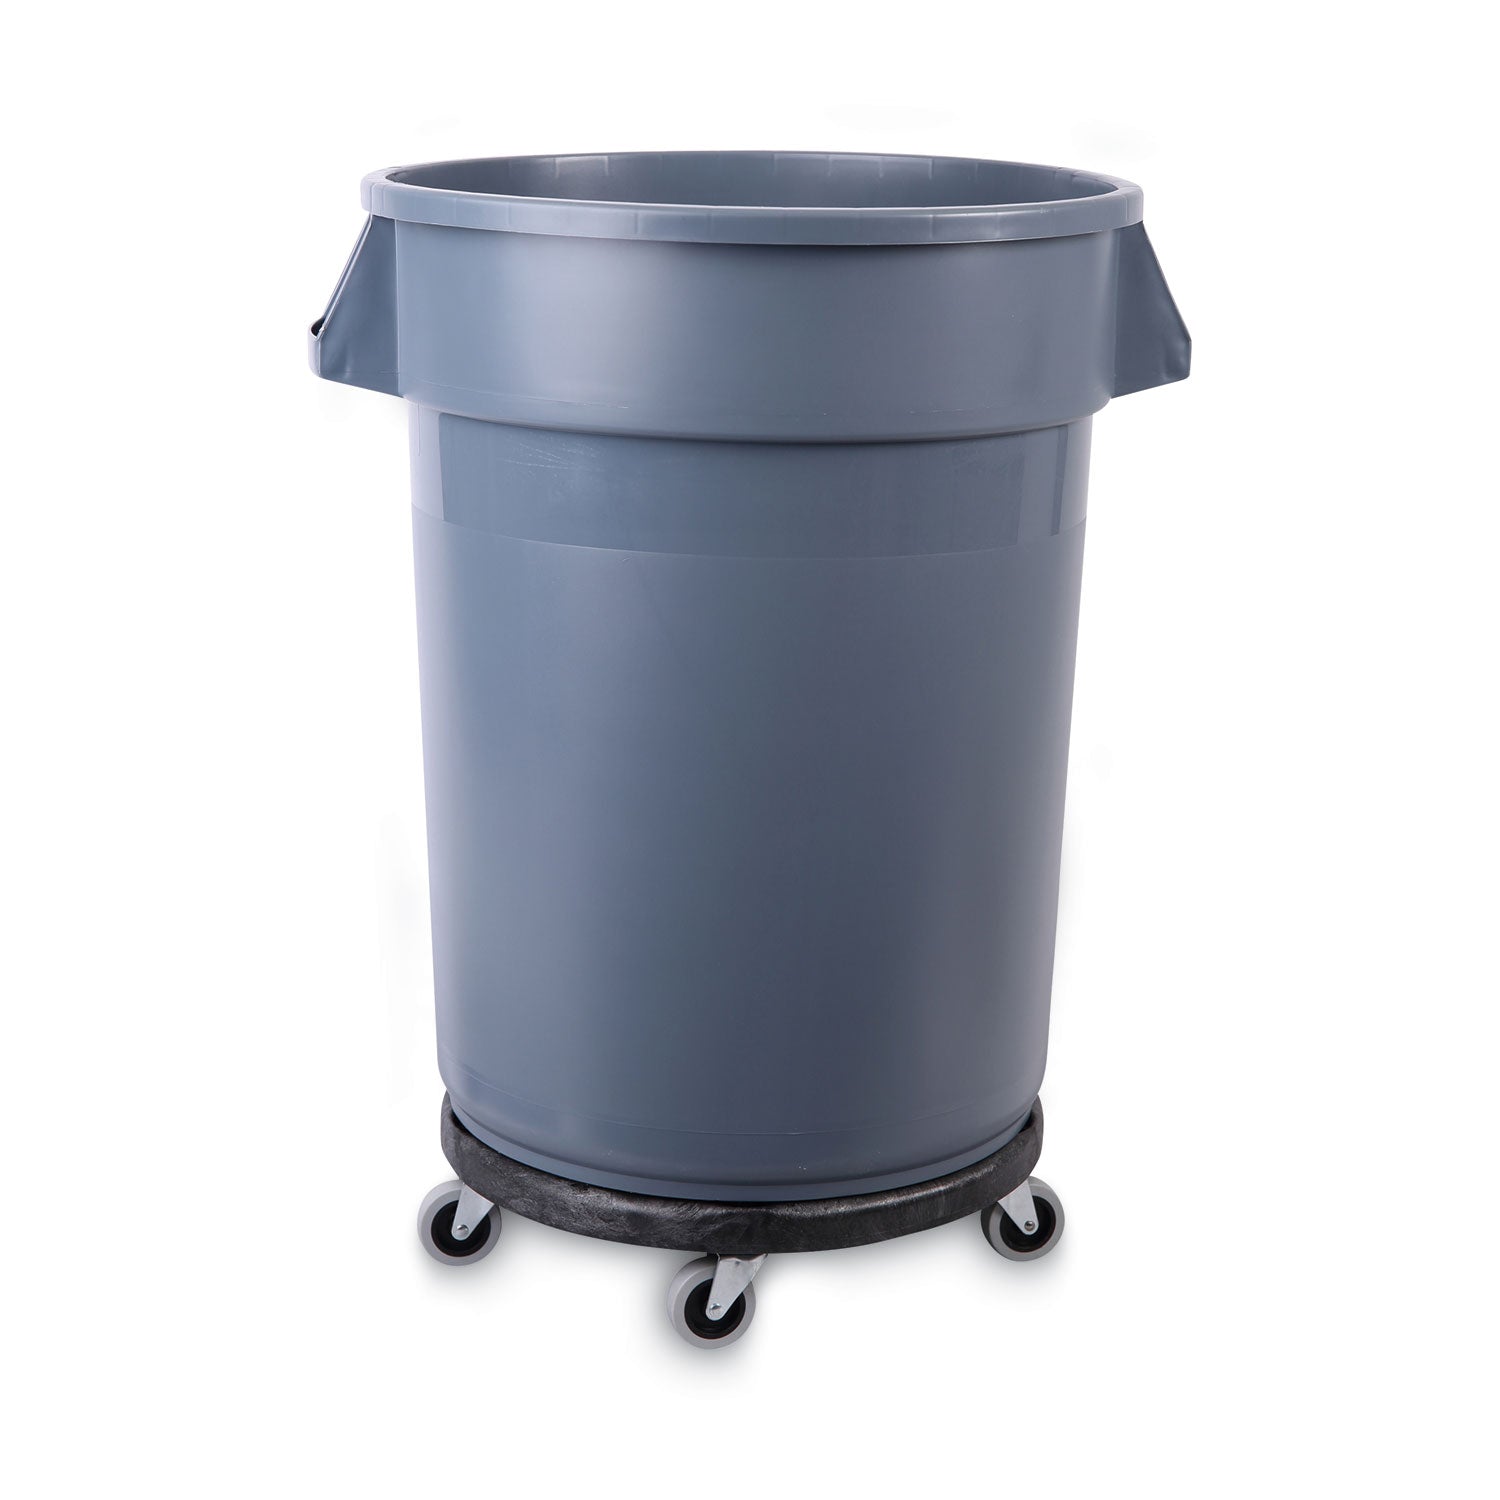 refuse-container-utility-dolly-300-lb-capacity-1825-diameter-gray_bwkdolly - 6